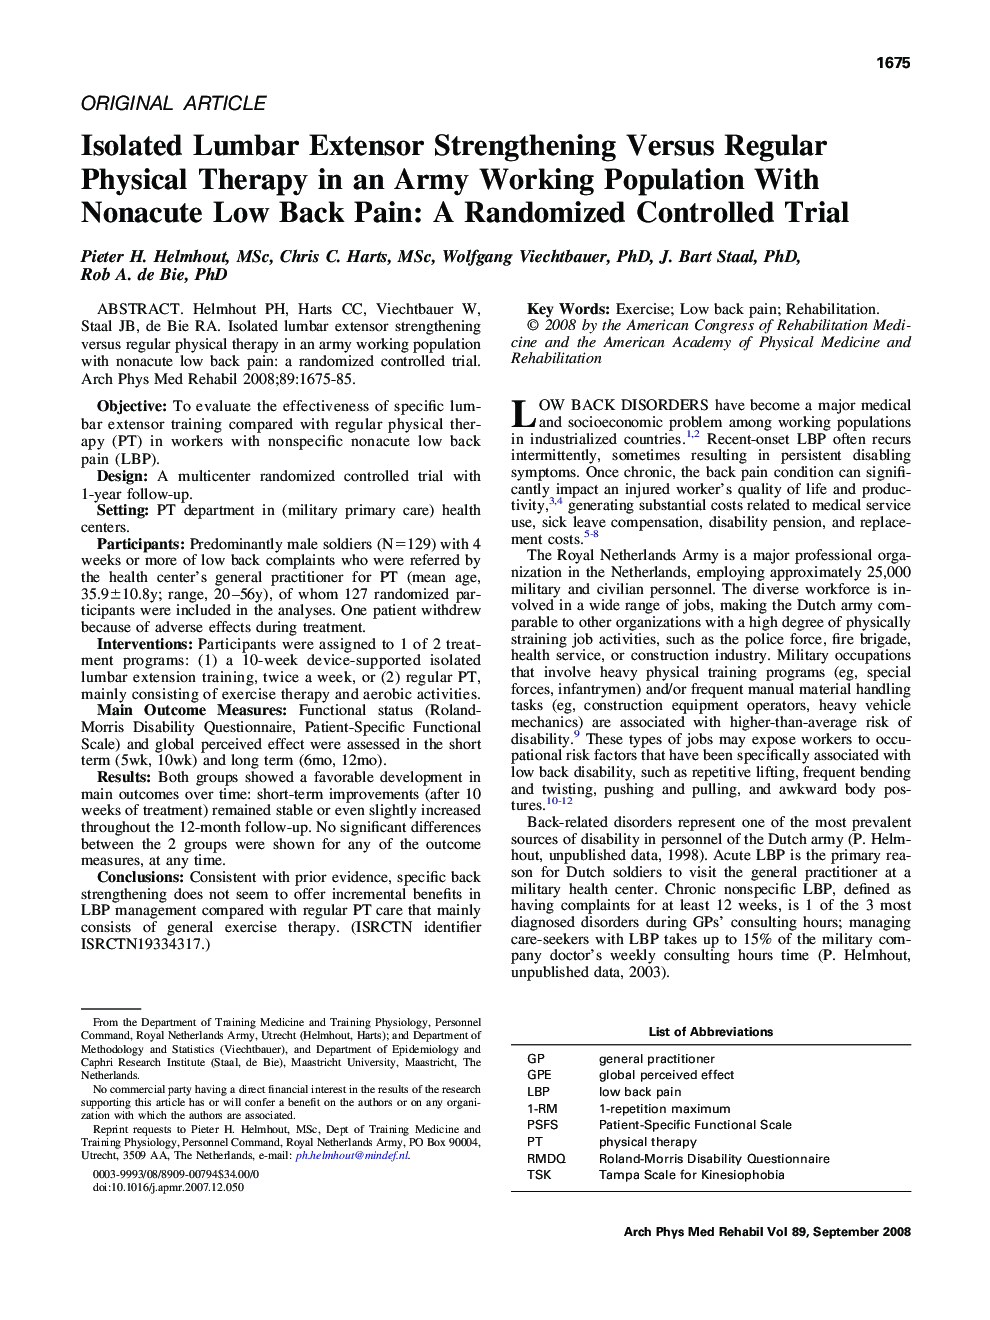 Isolated Lumbar Extensor Strengthening Versus Regular Physical Therapy in an Army Working Population With Nonacute Low Back Pain: A Randomized Controlled Trial 